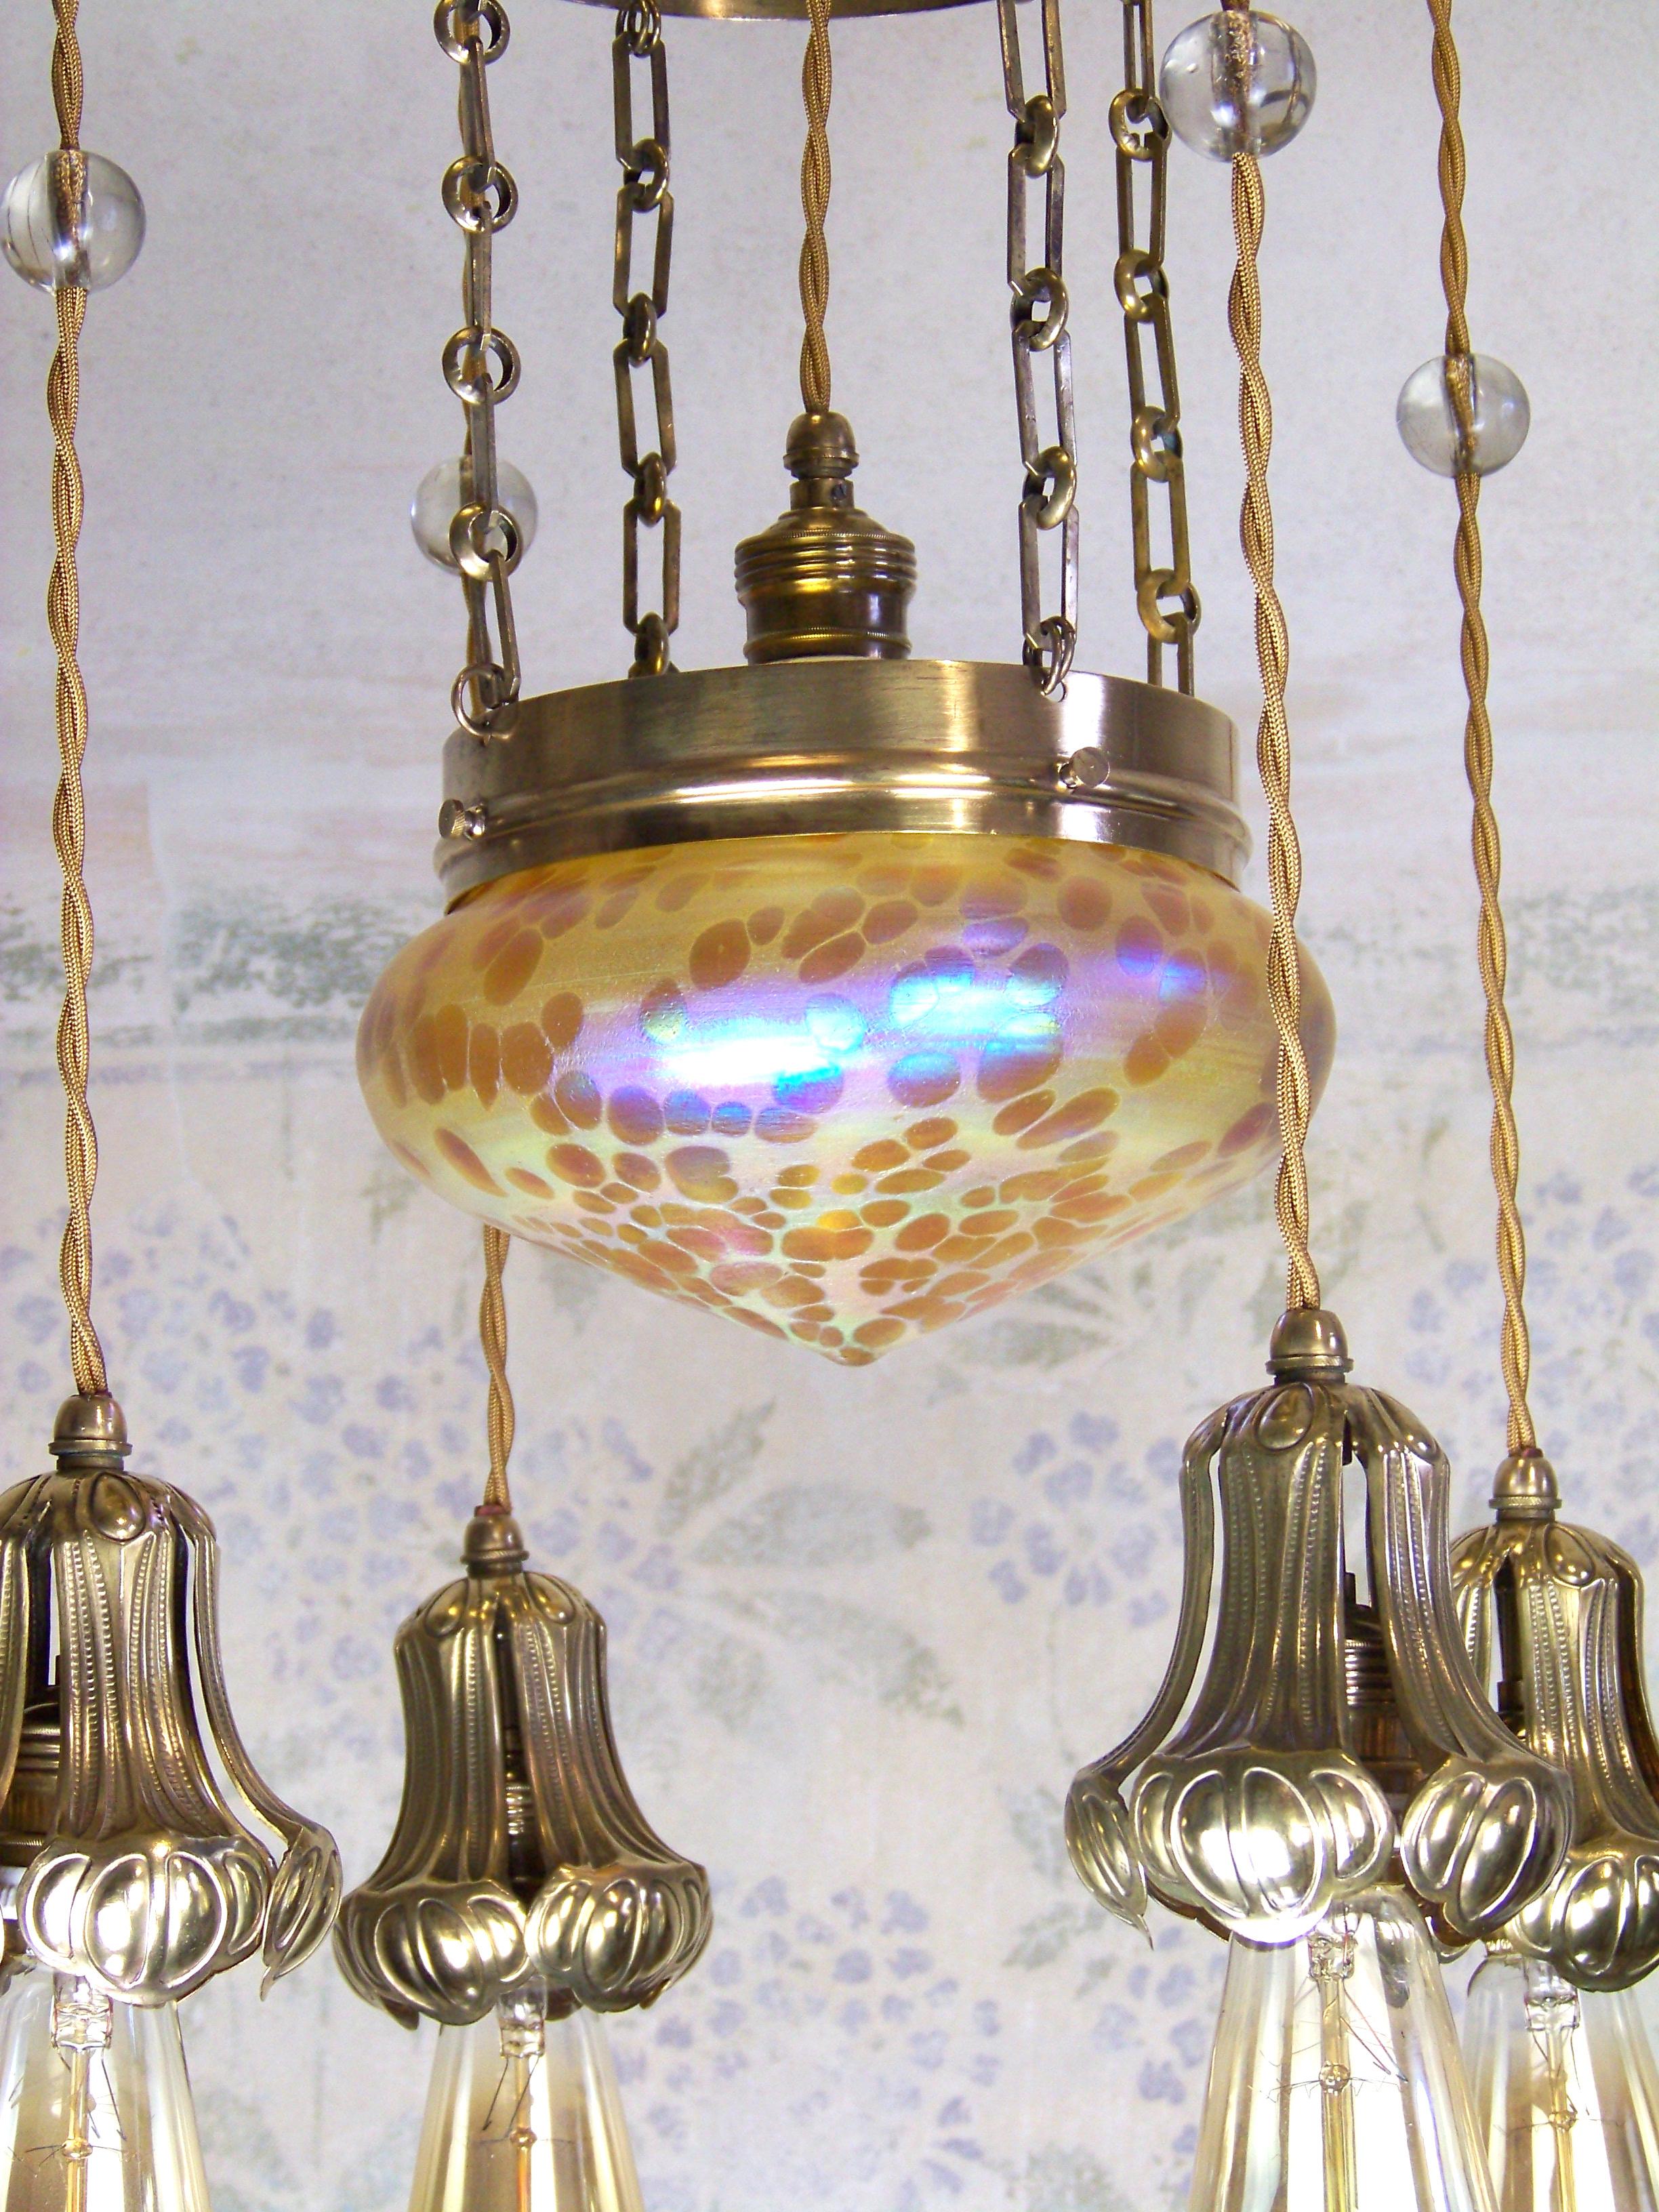 Fully functional. Brass body, new iridescent glass in Loetz style - Astraea decor. New wiring.